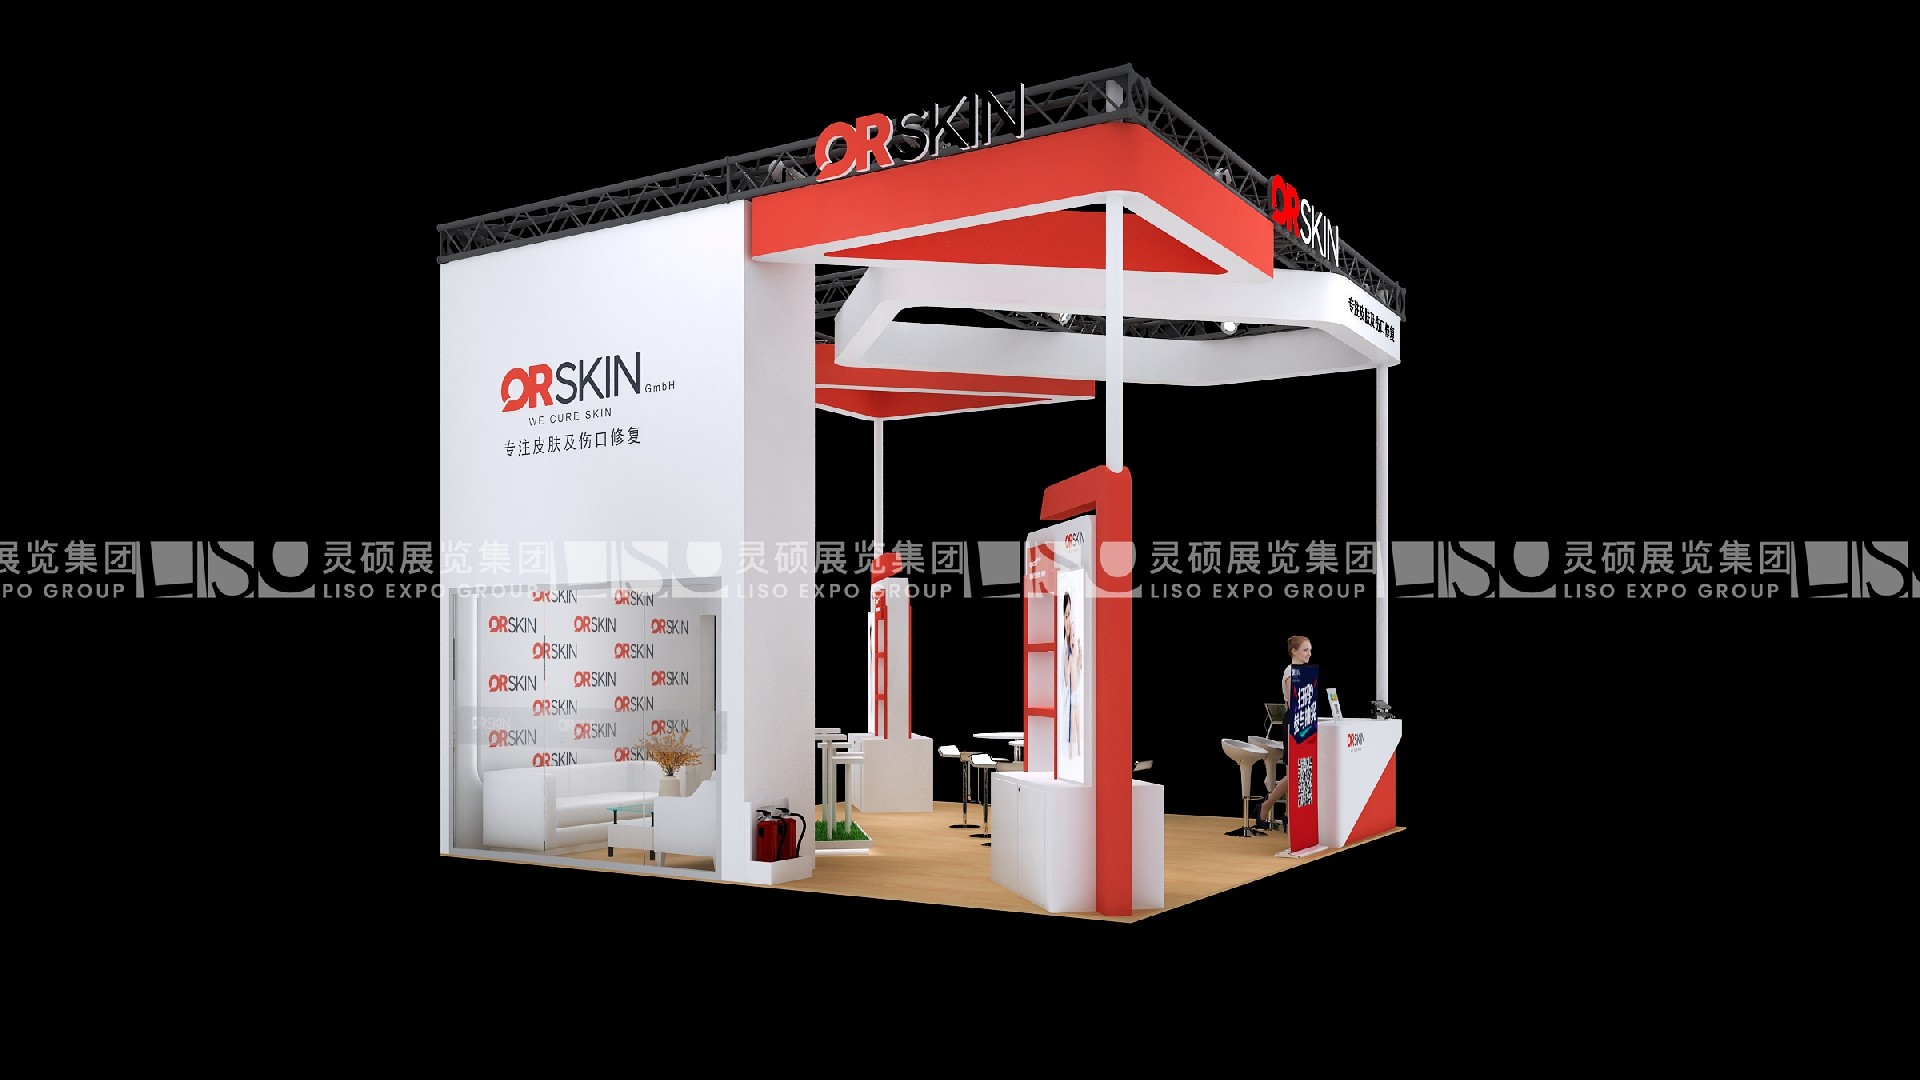 QRSKIN-The 4th CIIE Booth Design Case